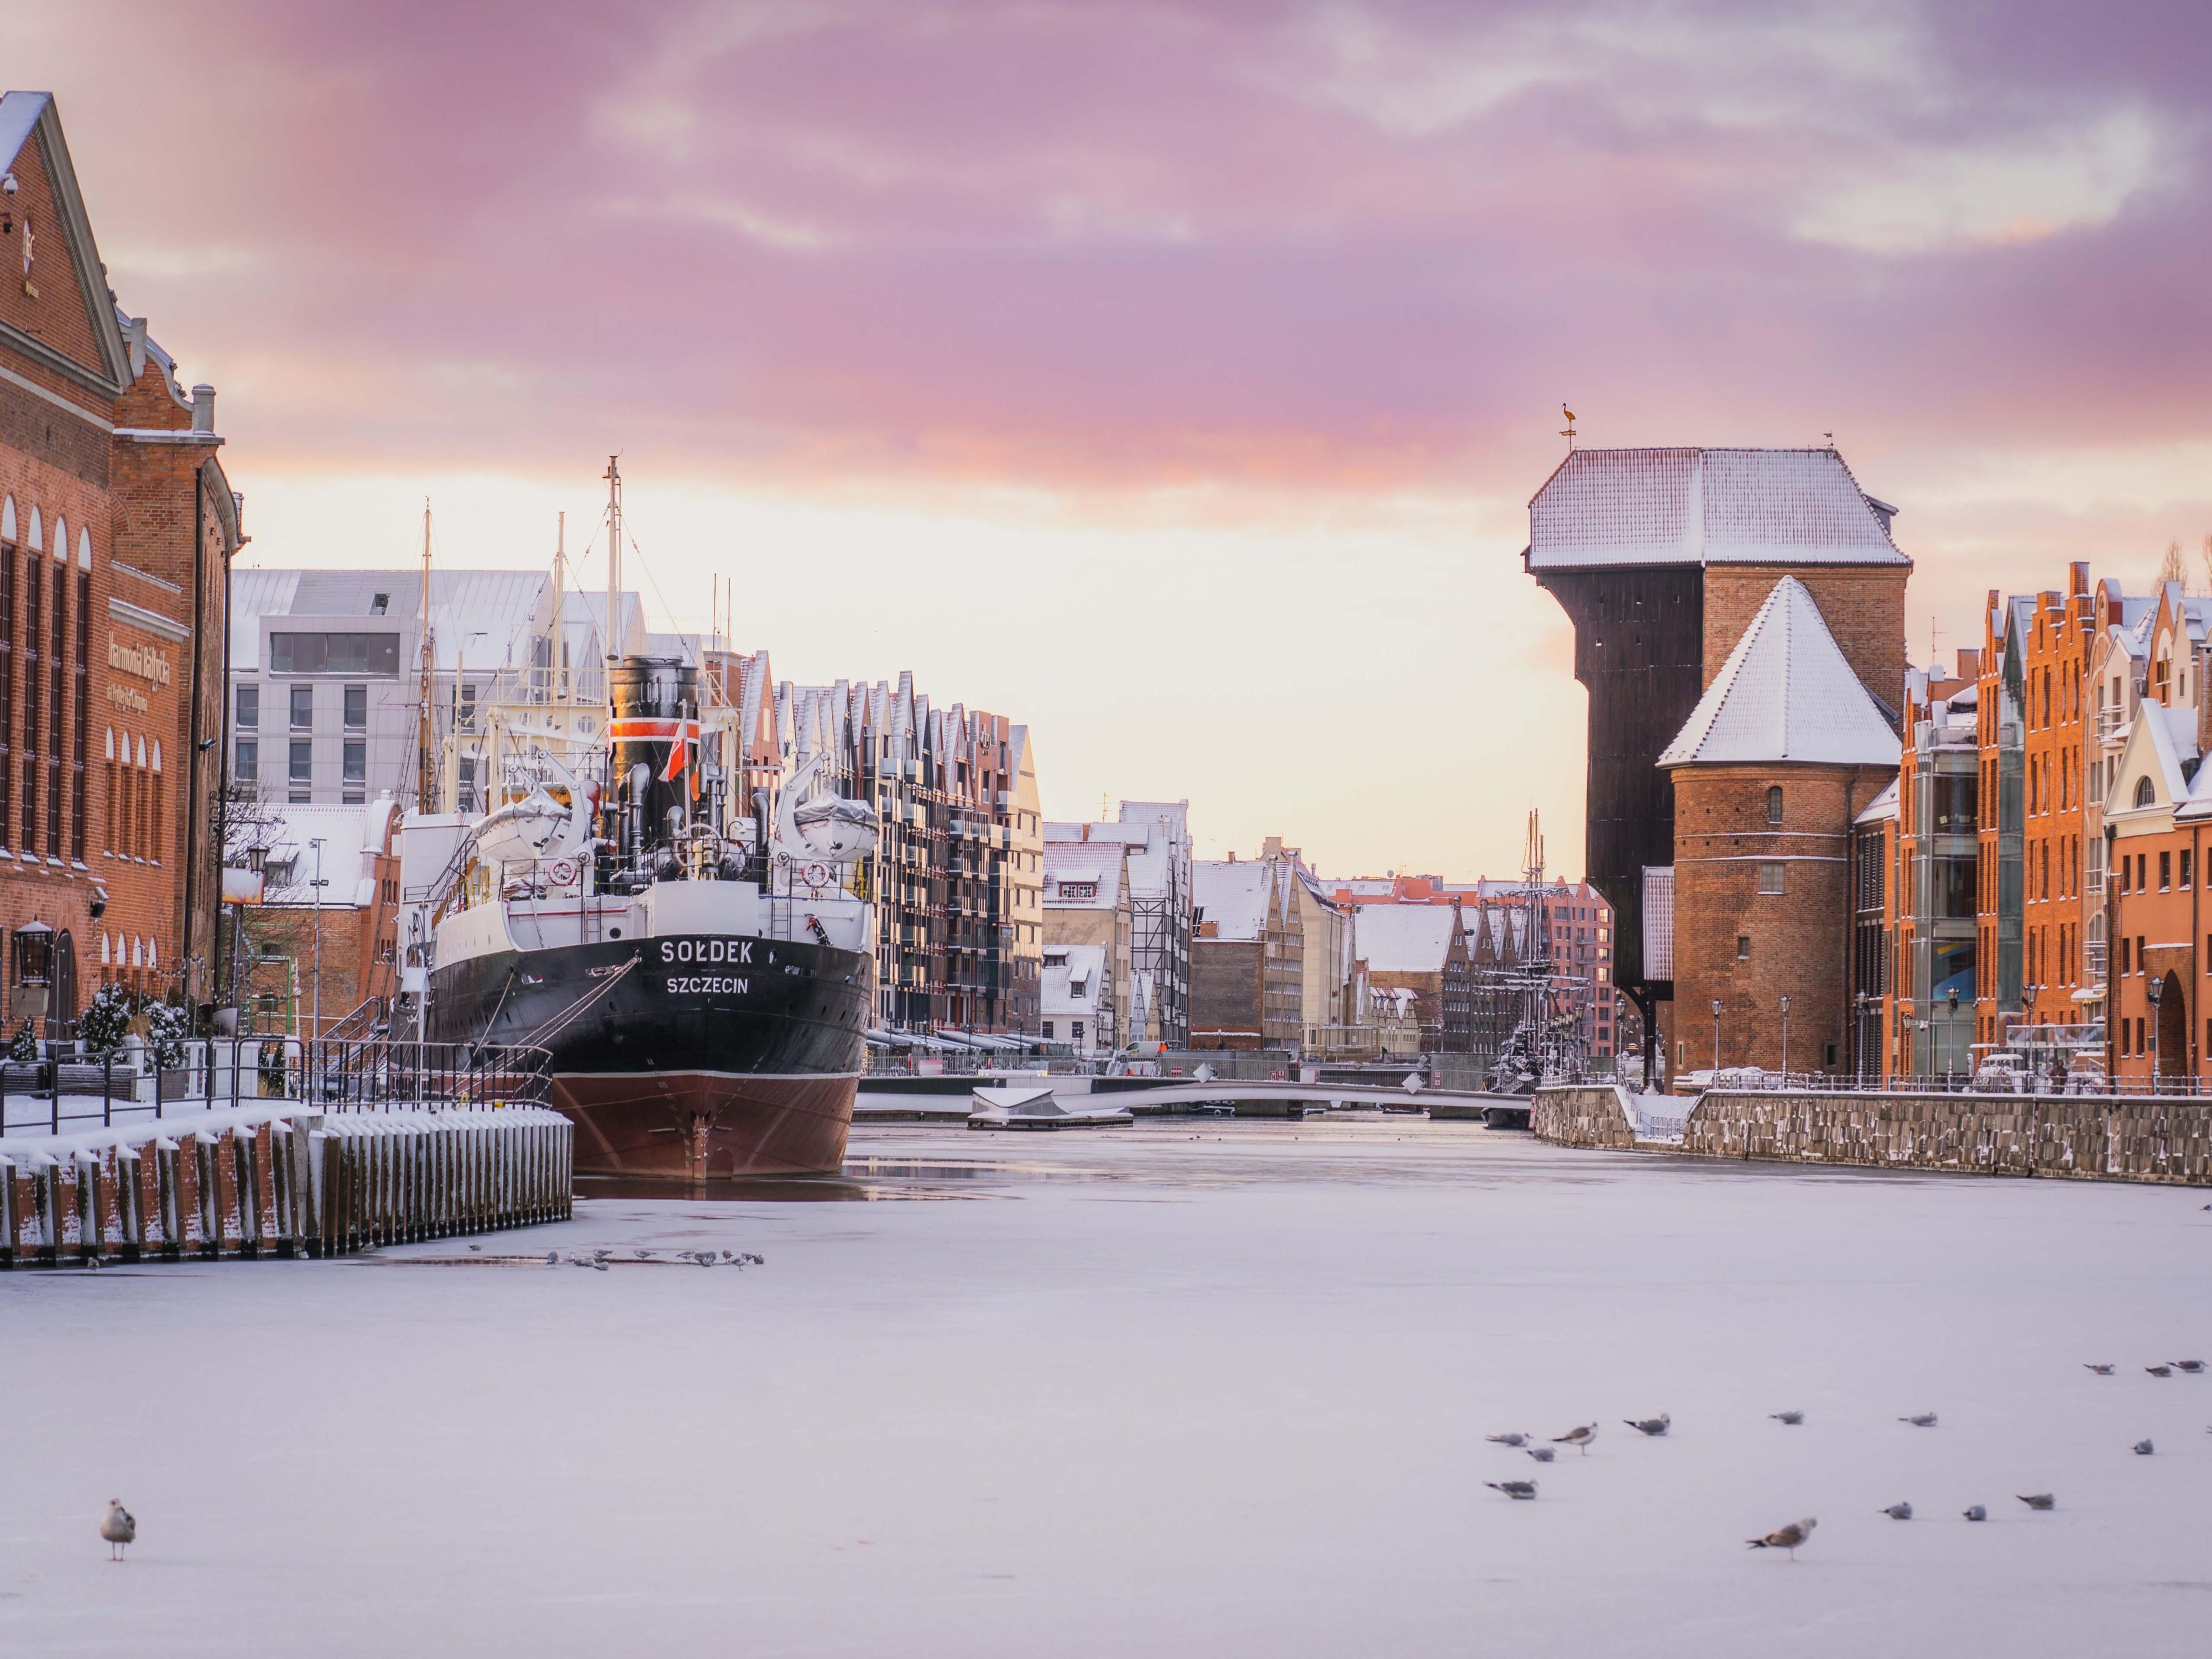 Discover Gdańsk this Winter